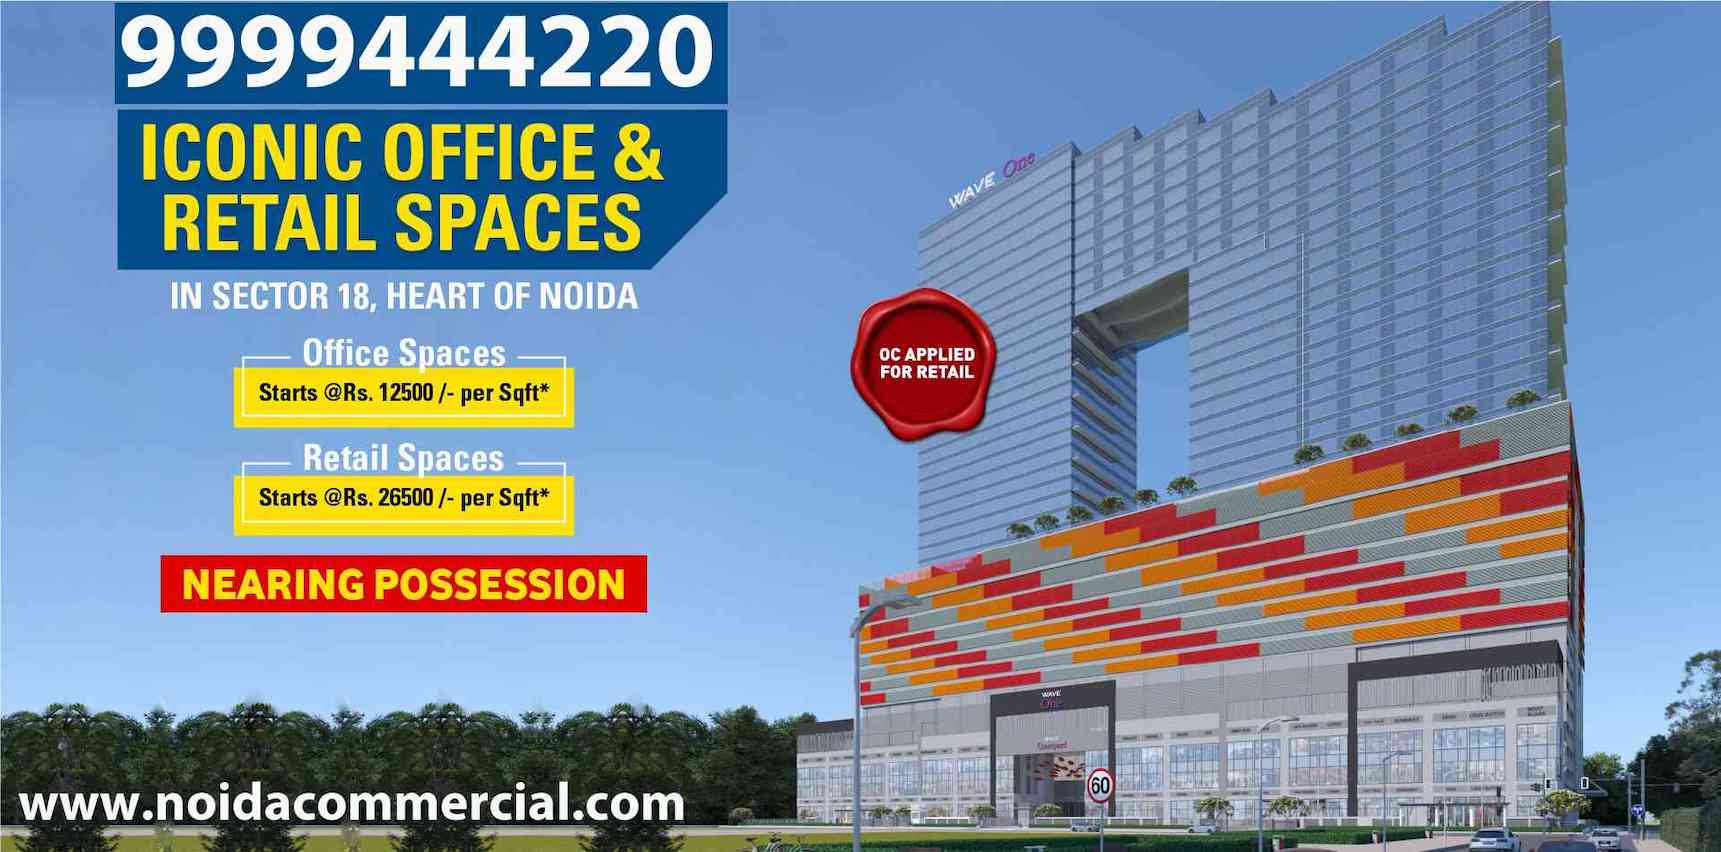 Wave One Noida as iconic Business tower that offers Everything